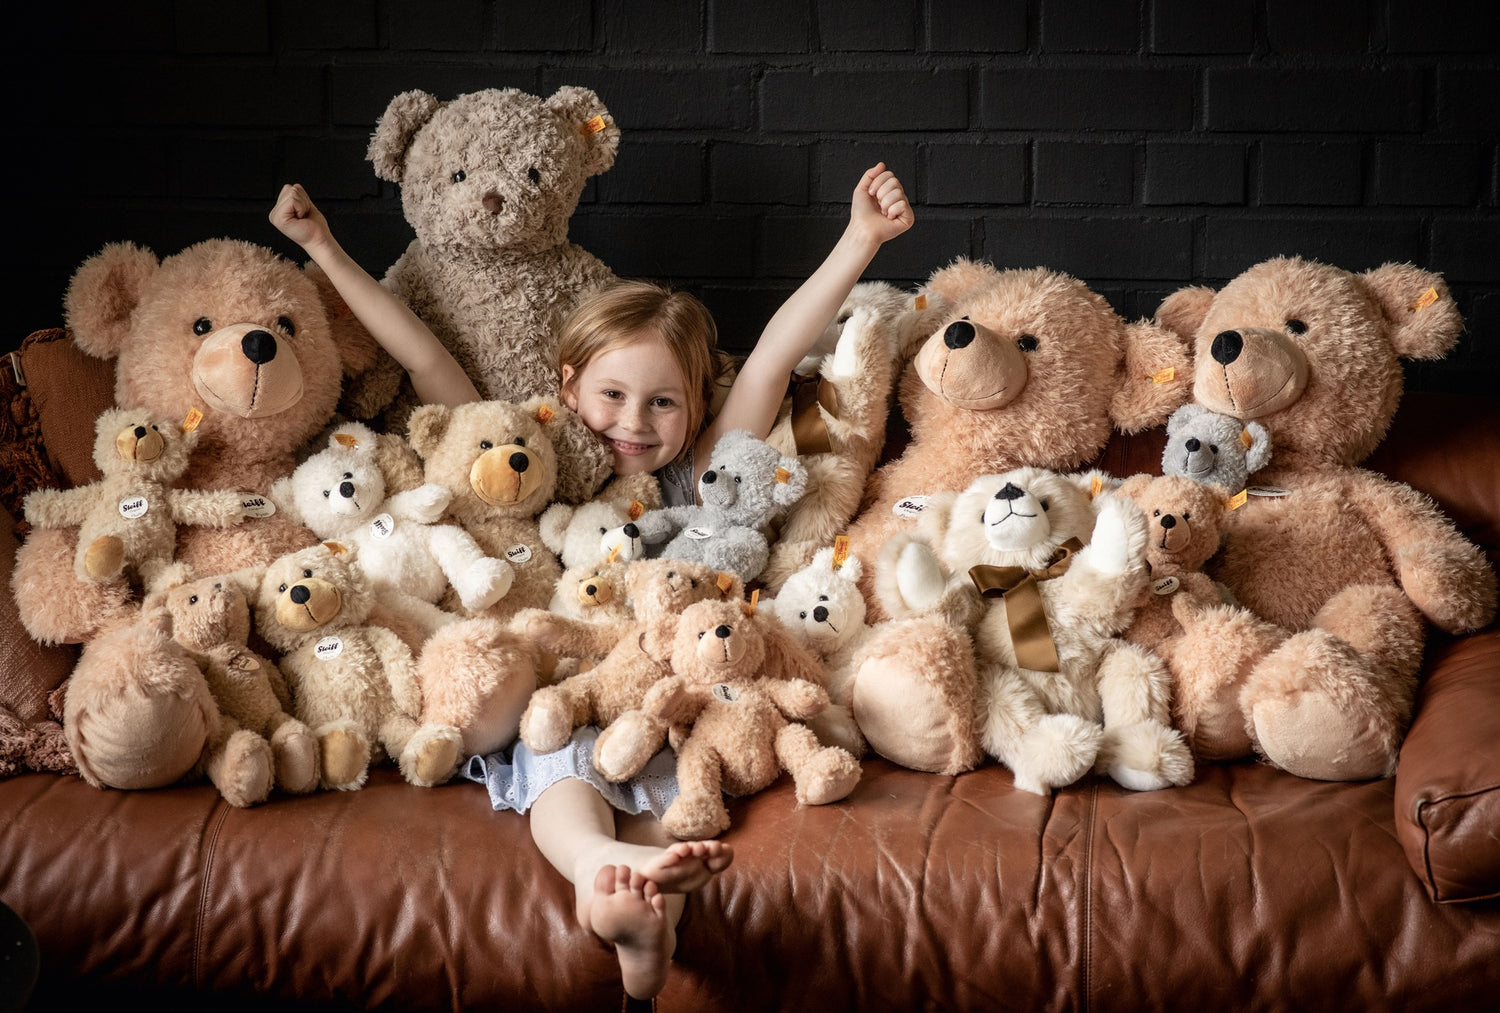 Collectable Teddy Bears and Characters from Steiff